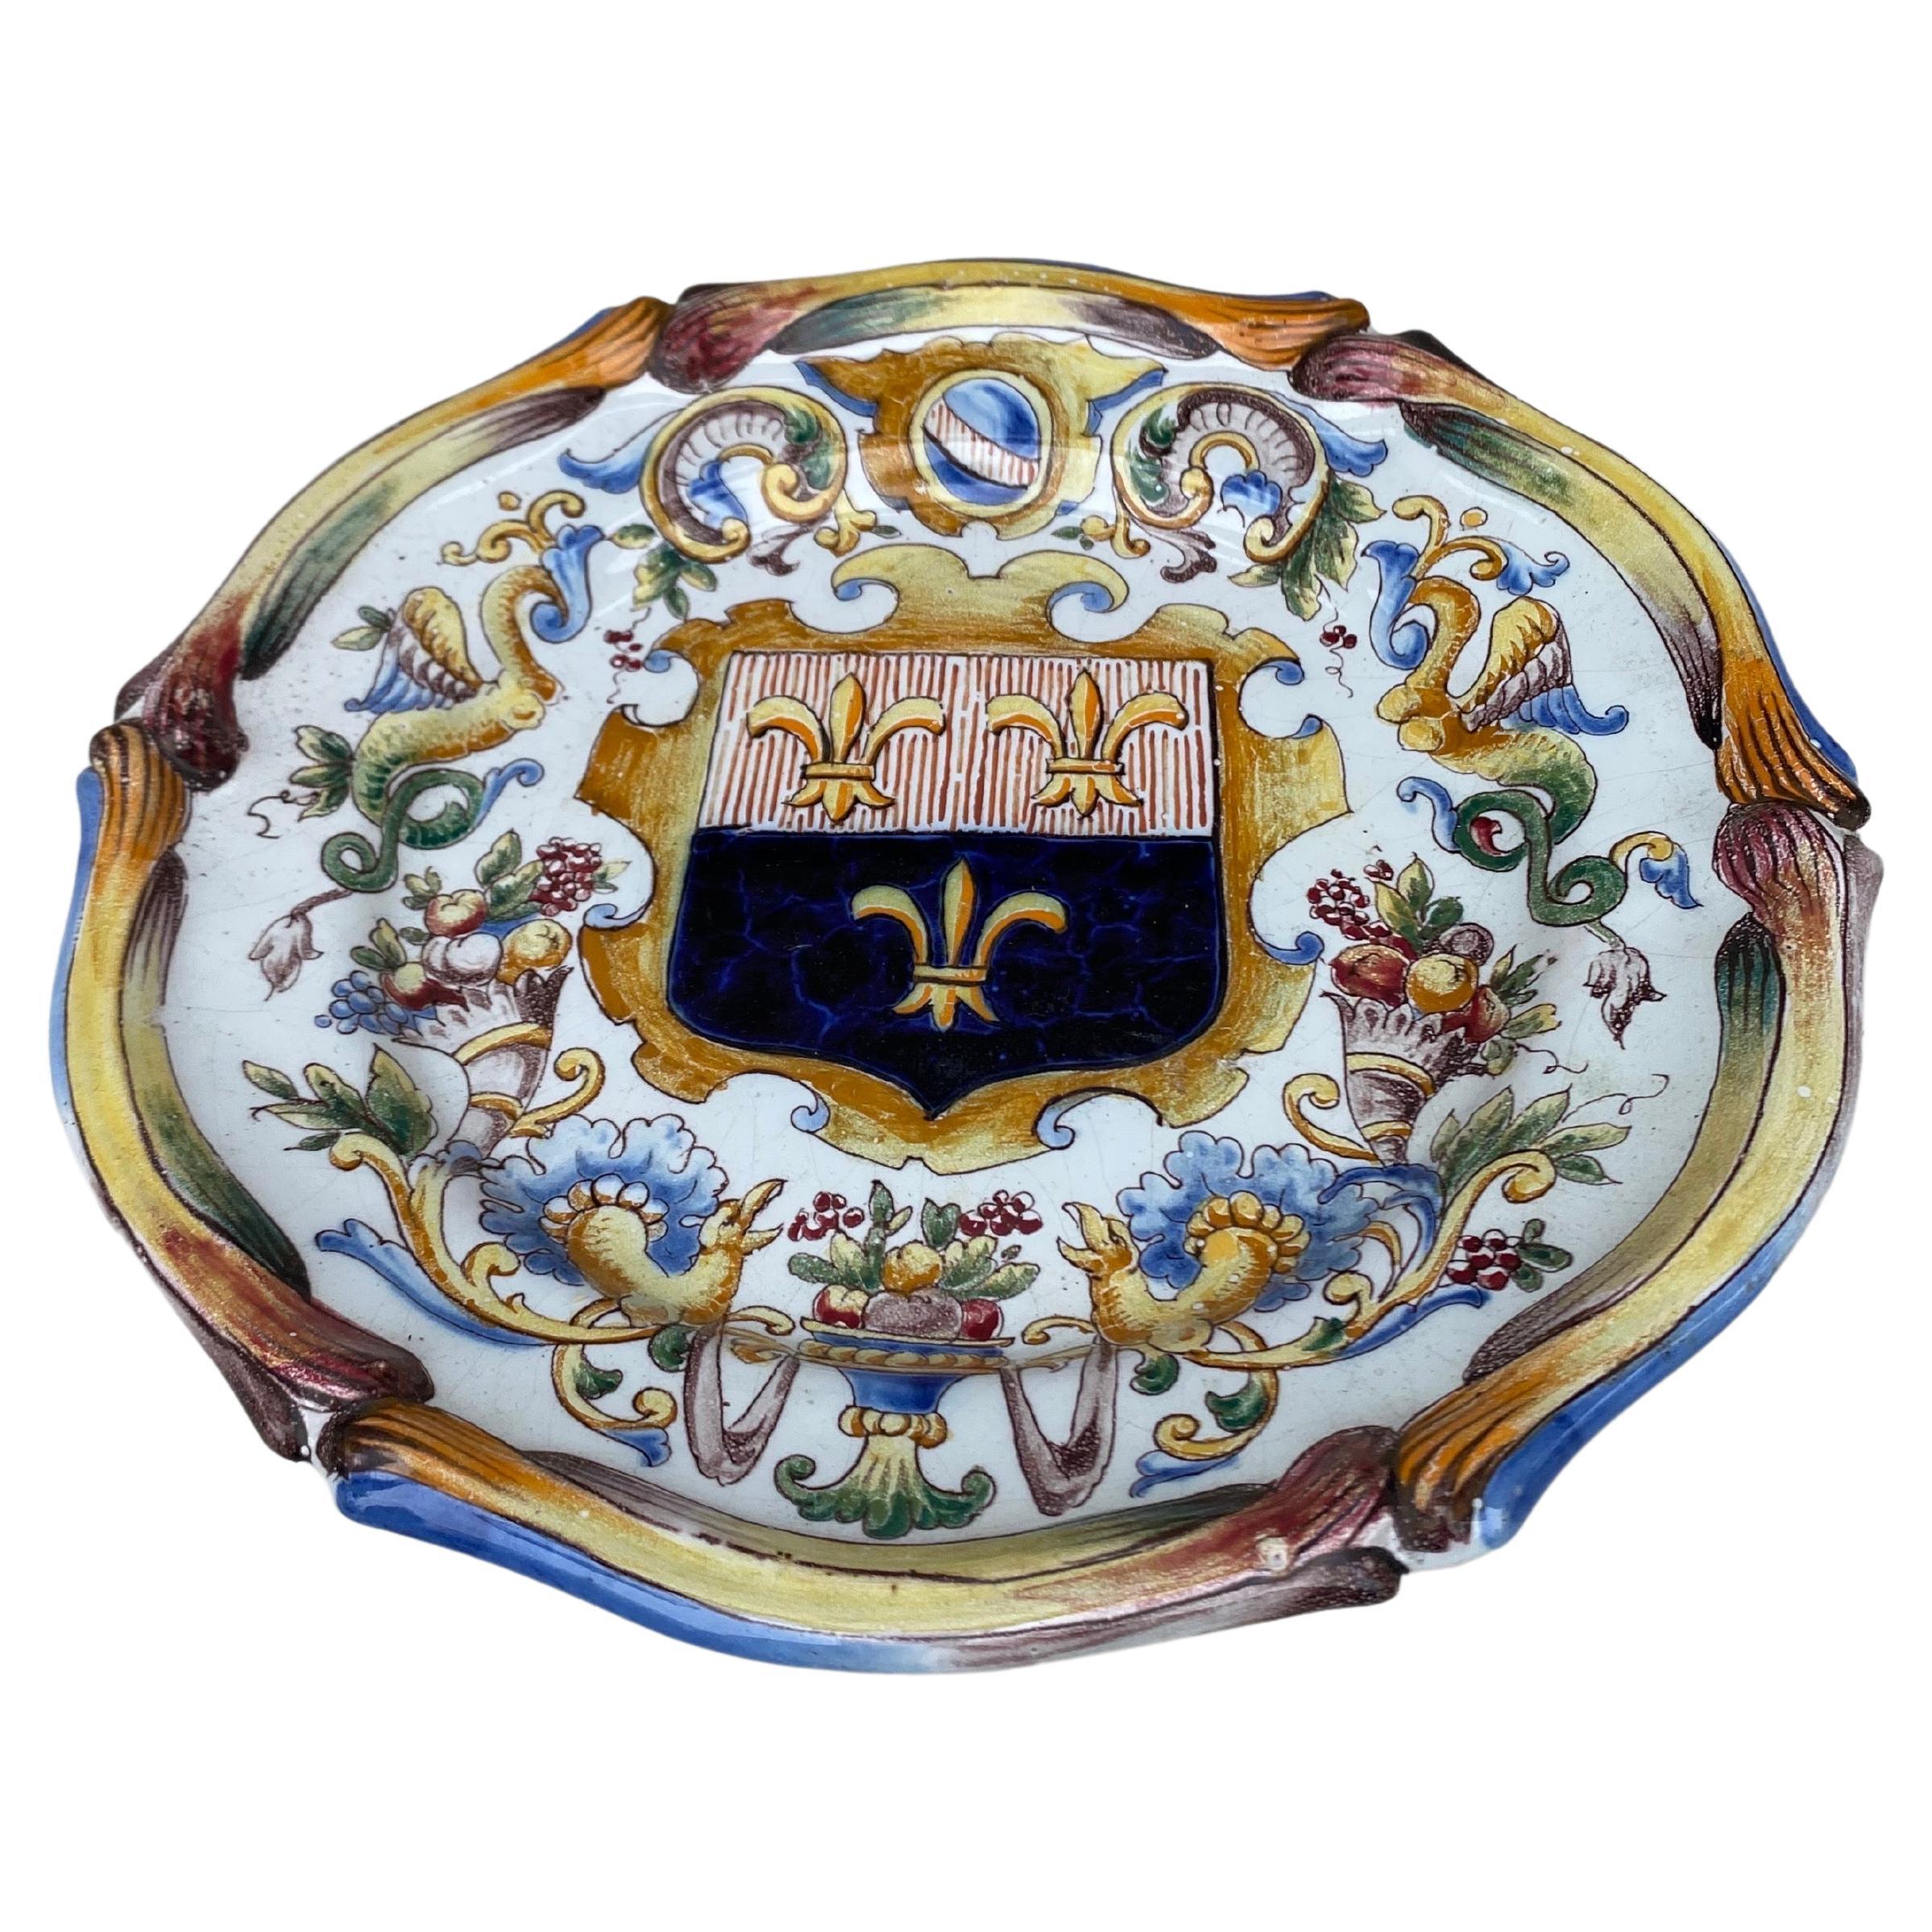 French Faience plate signed Saint Clement Circa 1900.
Decorated with cornucopia and coat of arms with Fleur de lis on the center.